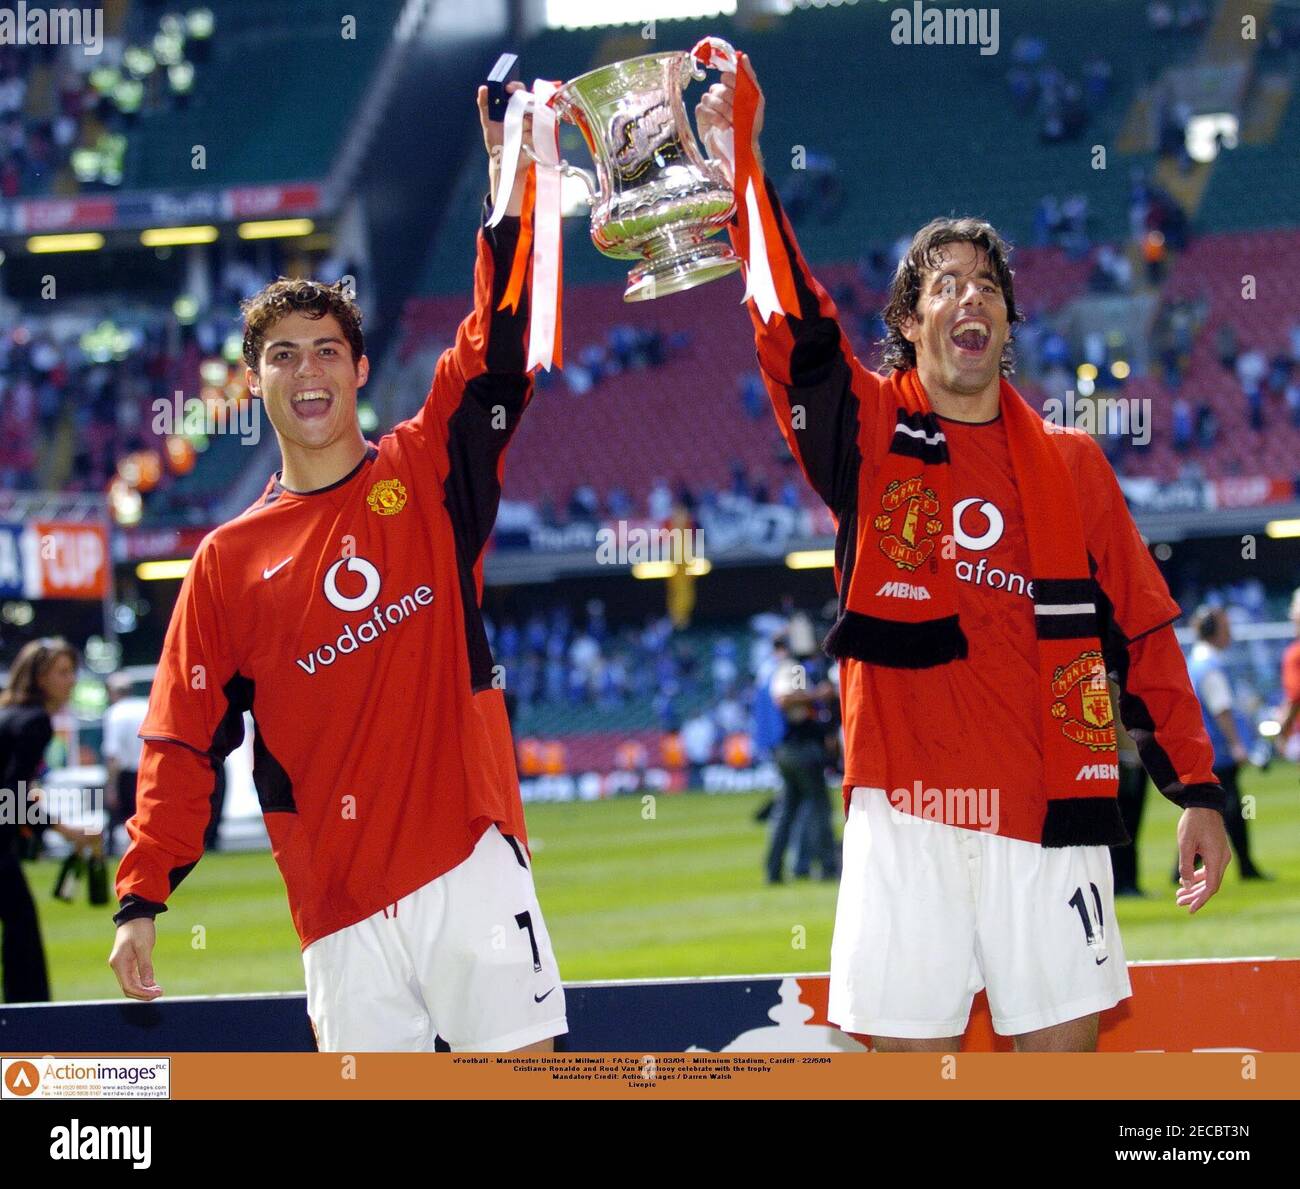 Football - Manchester United v Millwall - FA Cup Final 03/04 - Millennium  Stadium, Cardiff - 22/5/04 Cristiano Ronaldo and Ruud Van Nistelrooy  celebrate with the trophy Mandatory Credit: Action Images / Darren Walsh  Livepic Stock Photo - Alamy